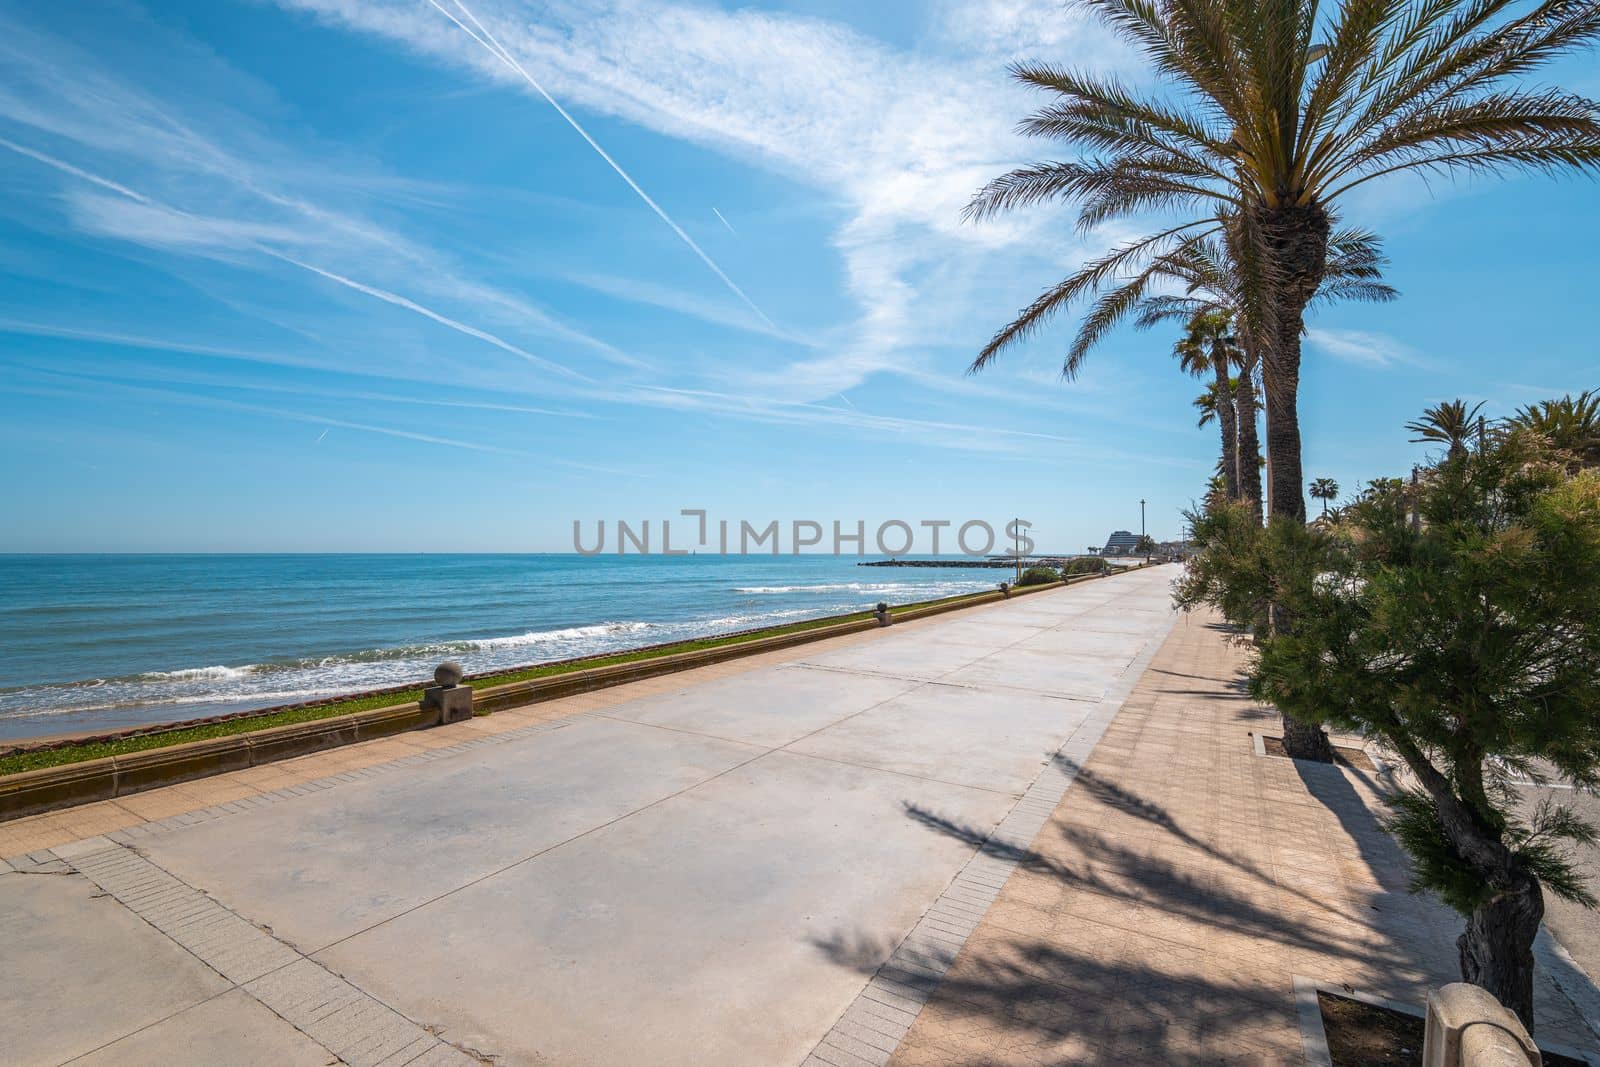 Excellent walks along the shore of the sea with azure water along a pedestrian road made of concrete slabs. Cloudless bright blue sky with bright sunlight overhead. Palm trees grow along the road. by apavlin